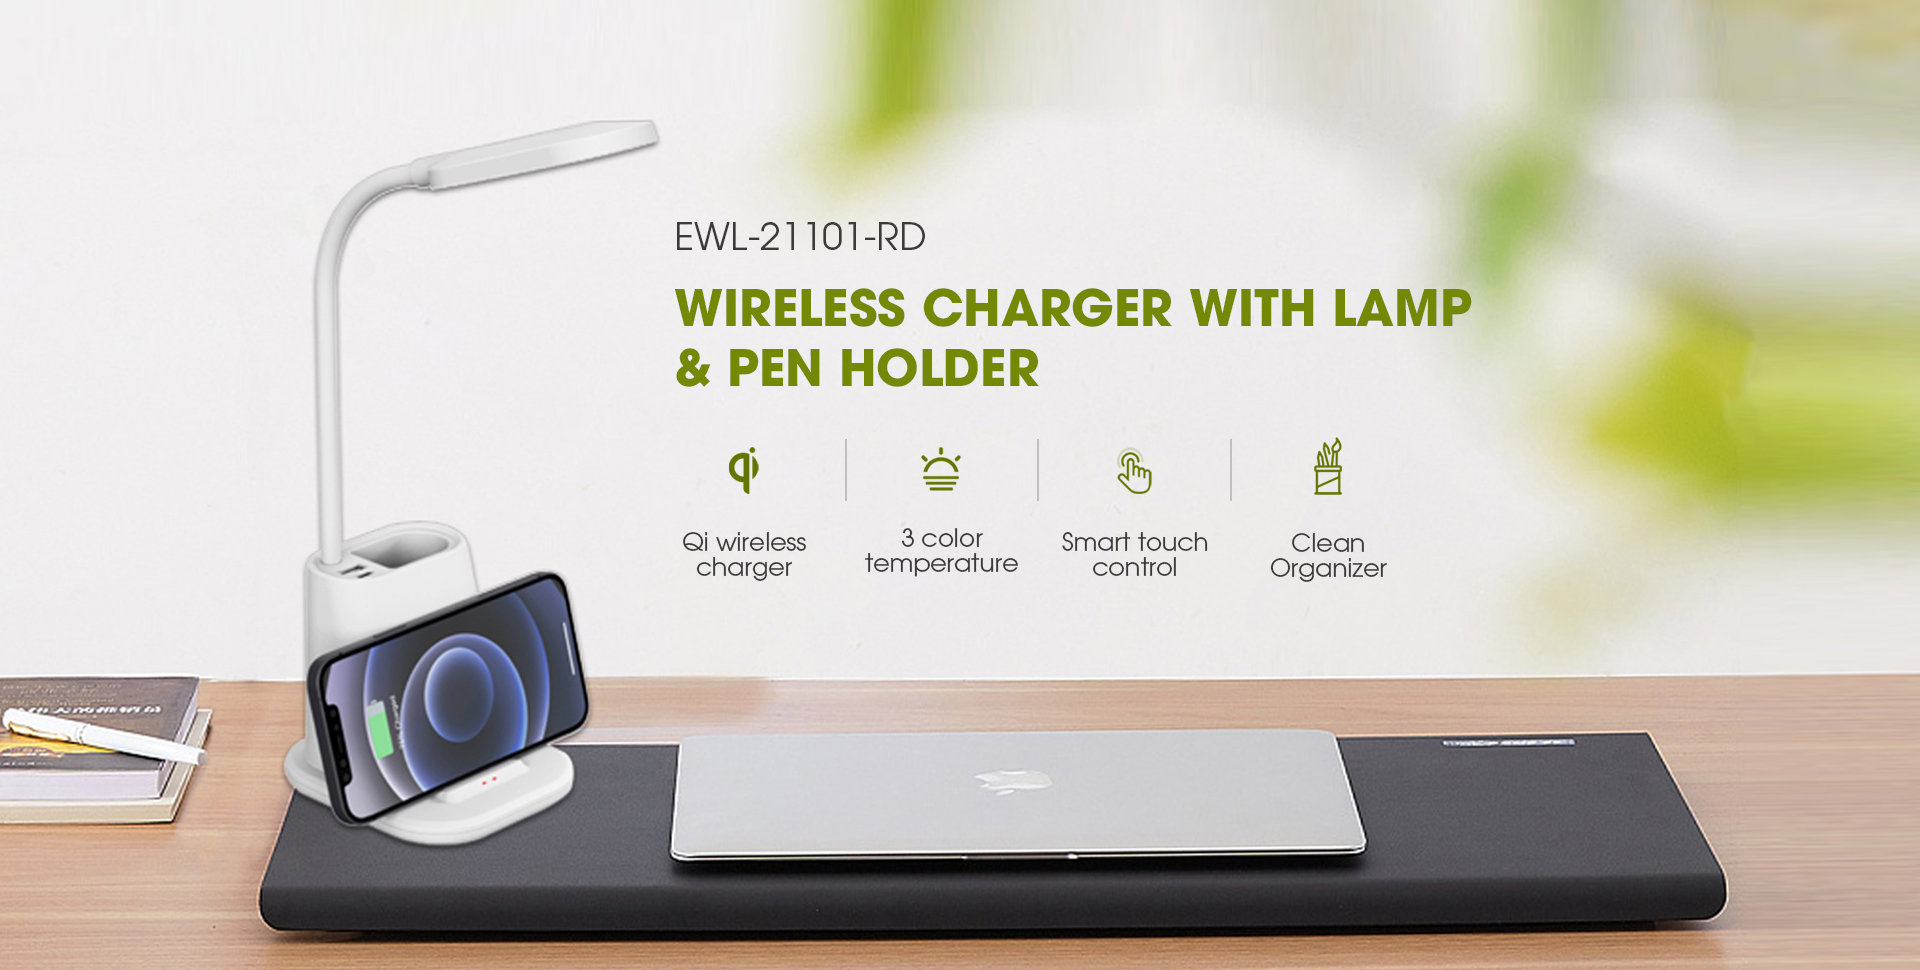 EWL-21101-RD Wireless charger with lamp & pen container / desk organizer